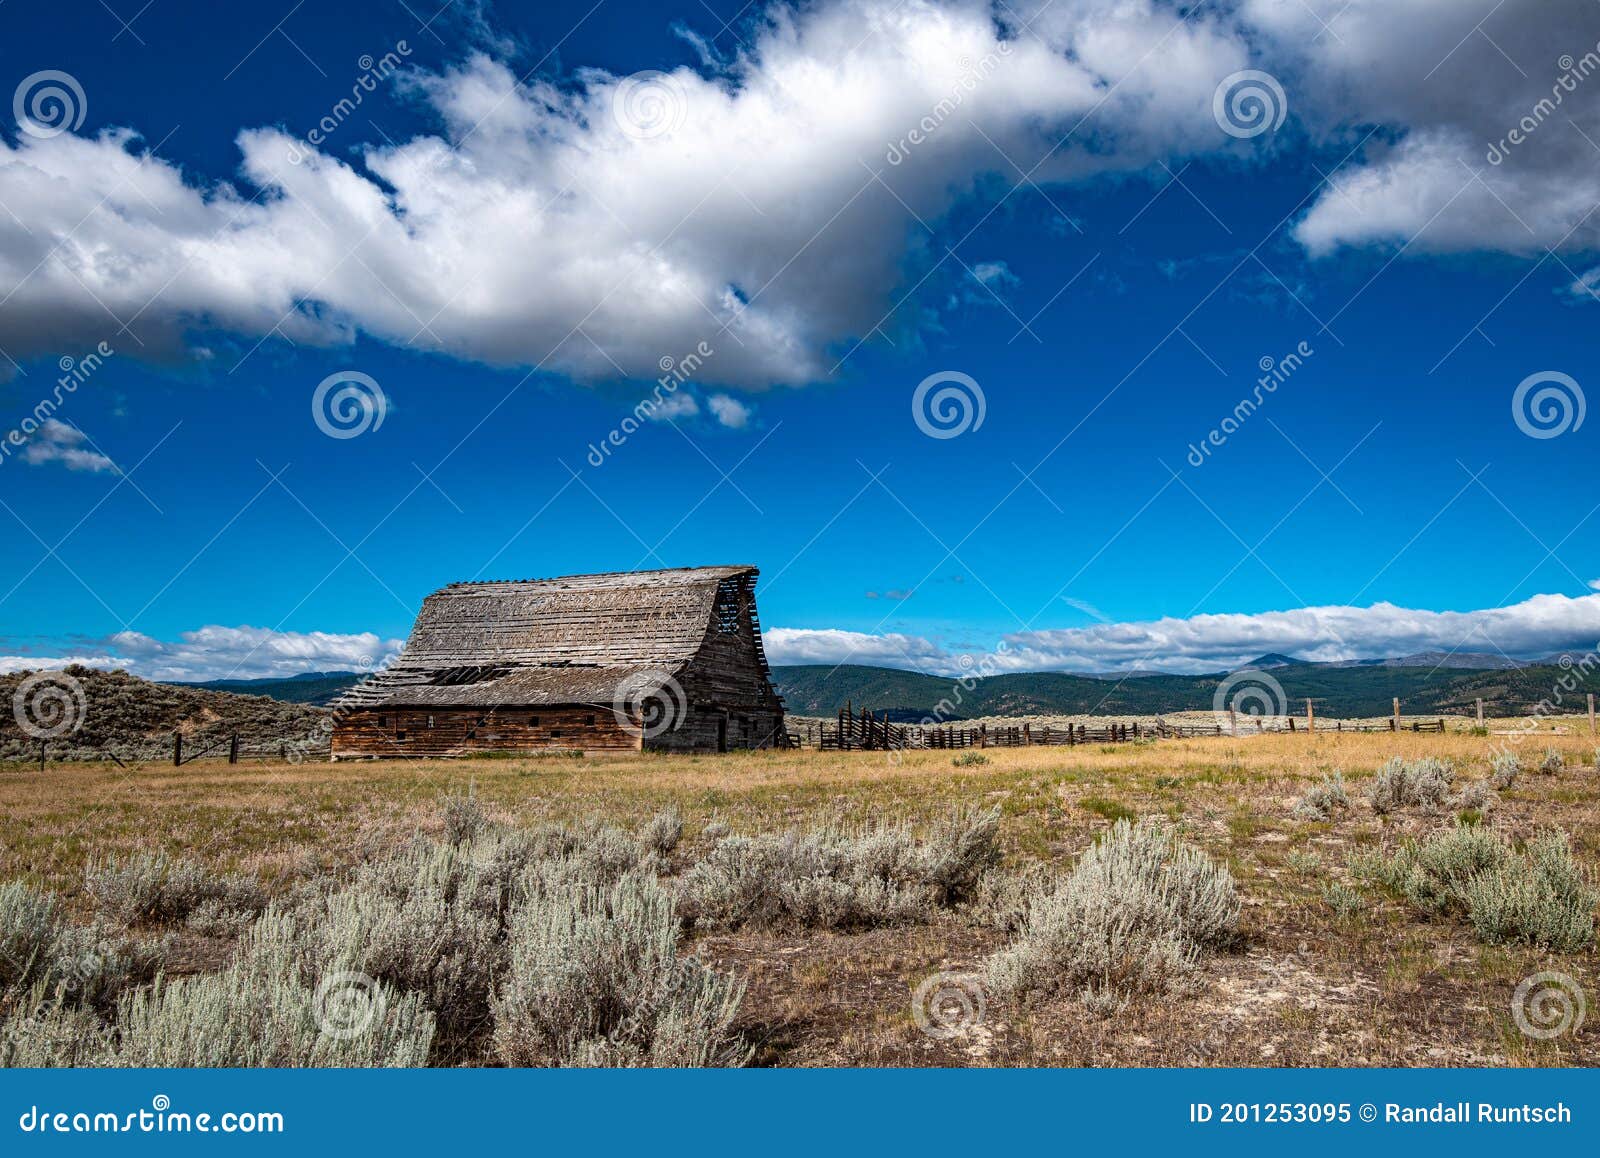 old barn on a ranch in montana